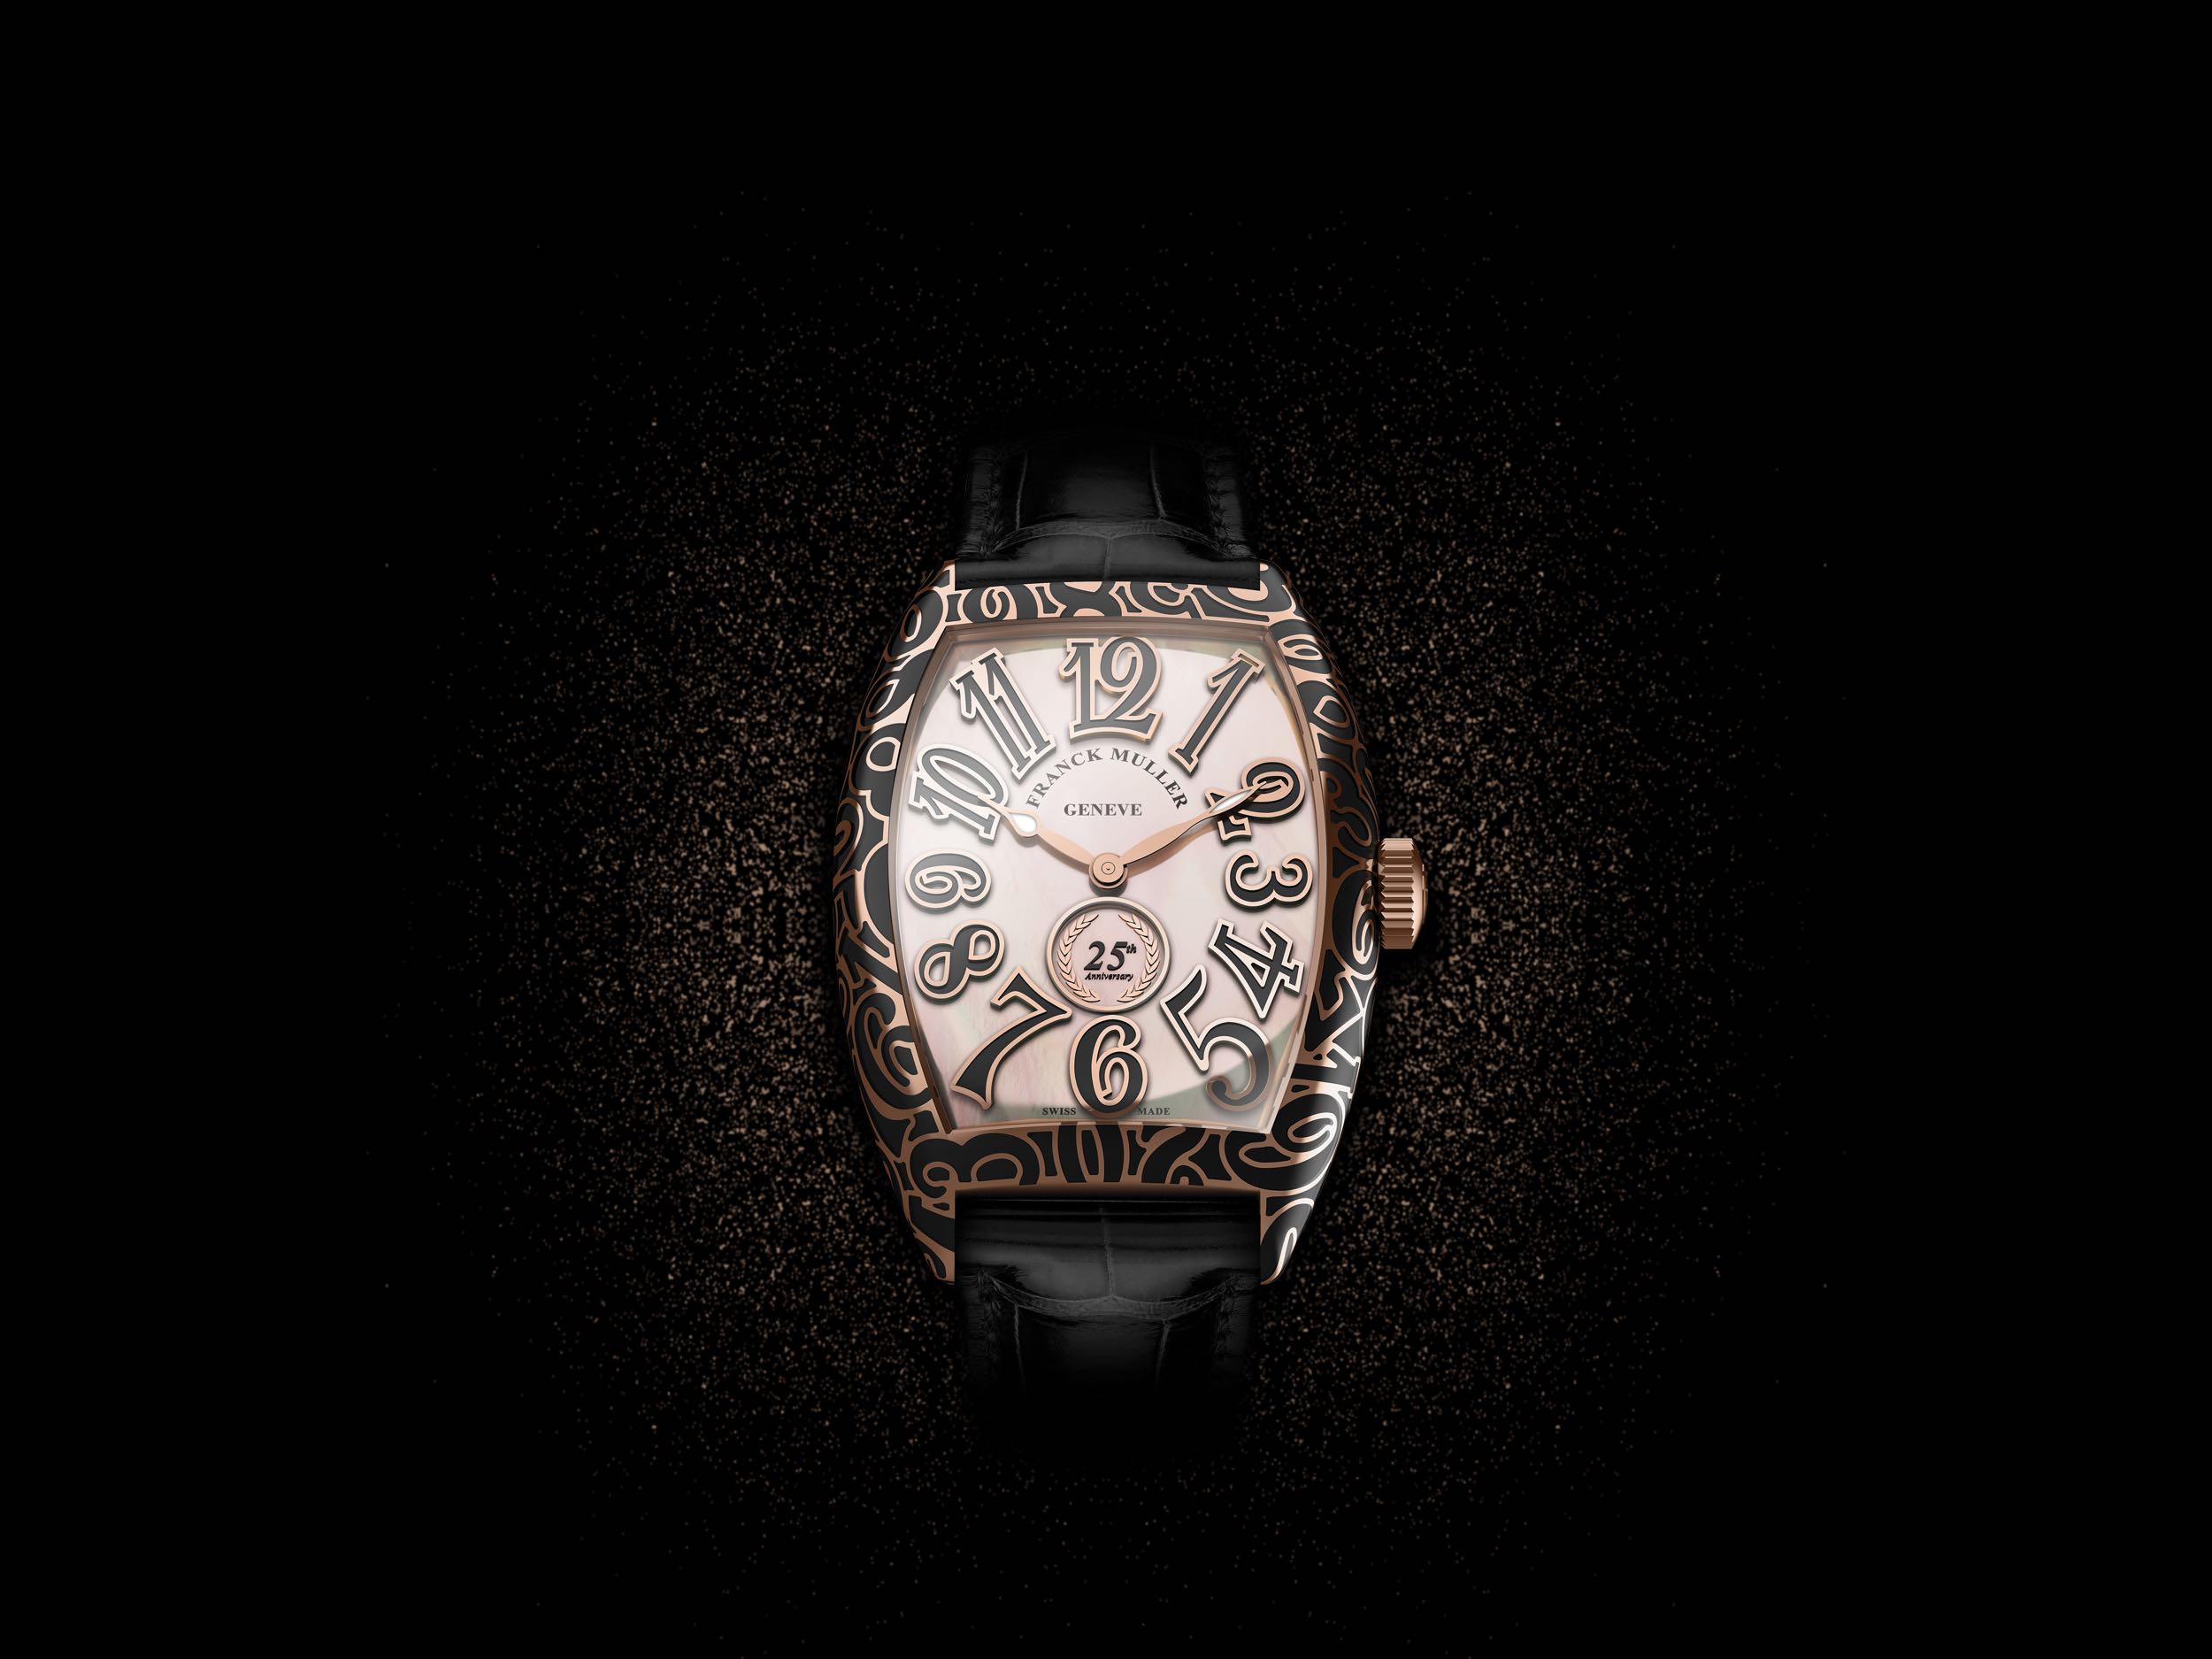 Fakes Christopher Ward Watches